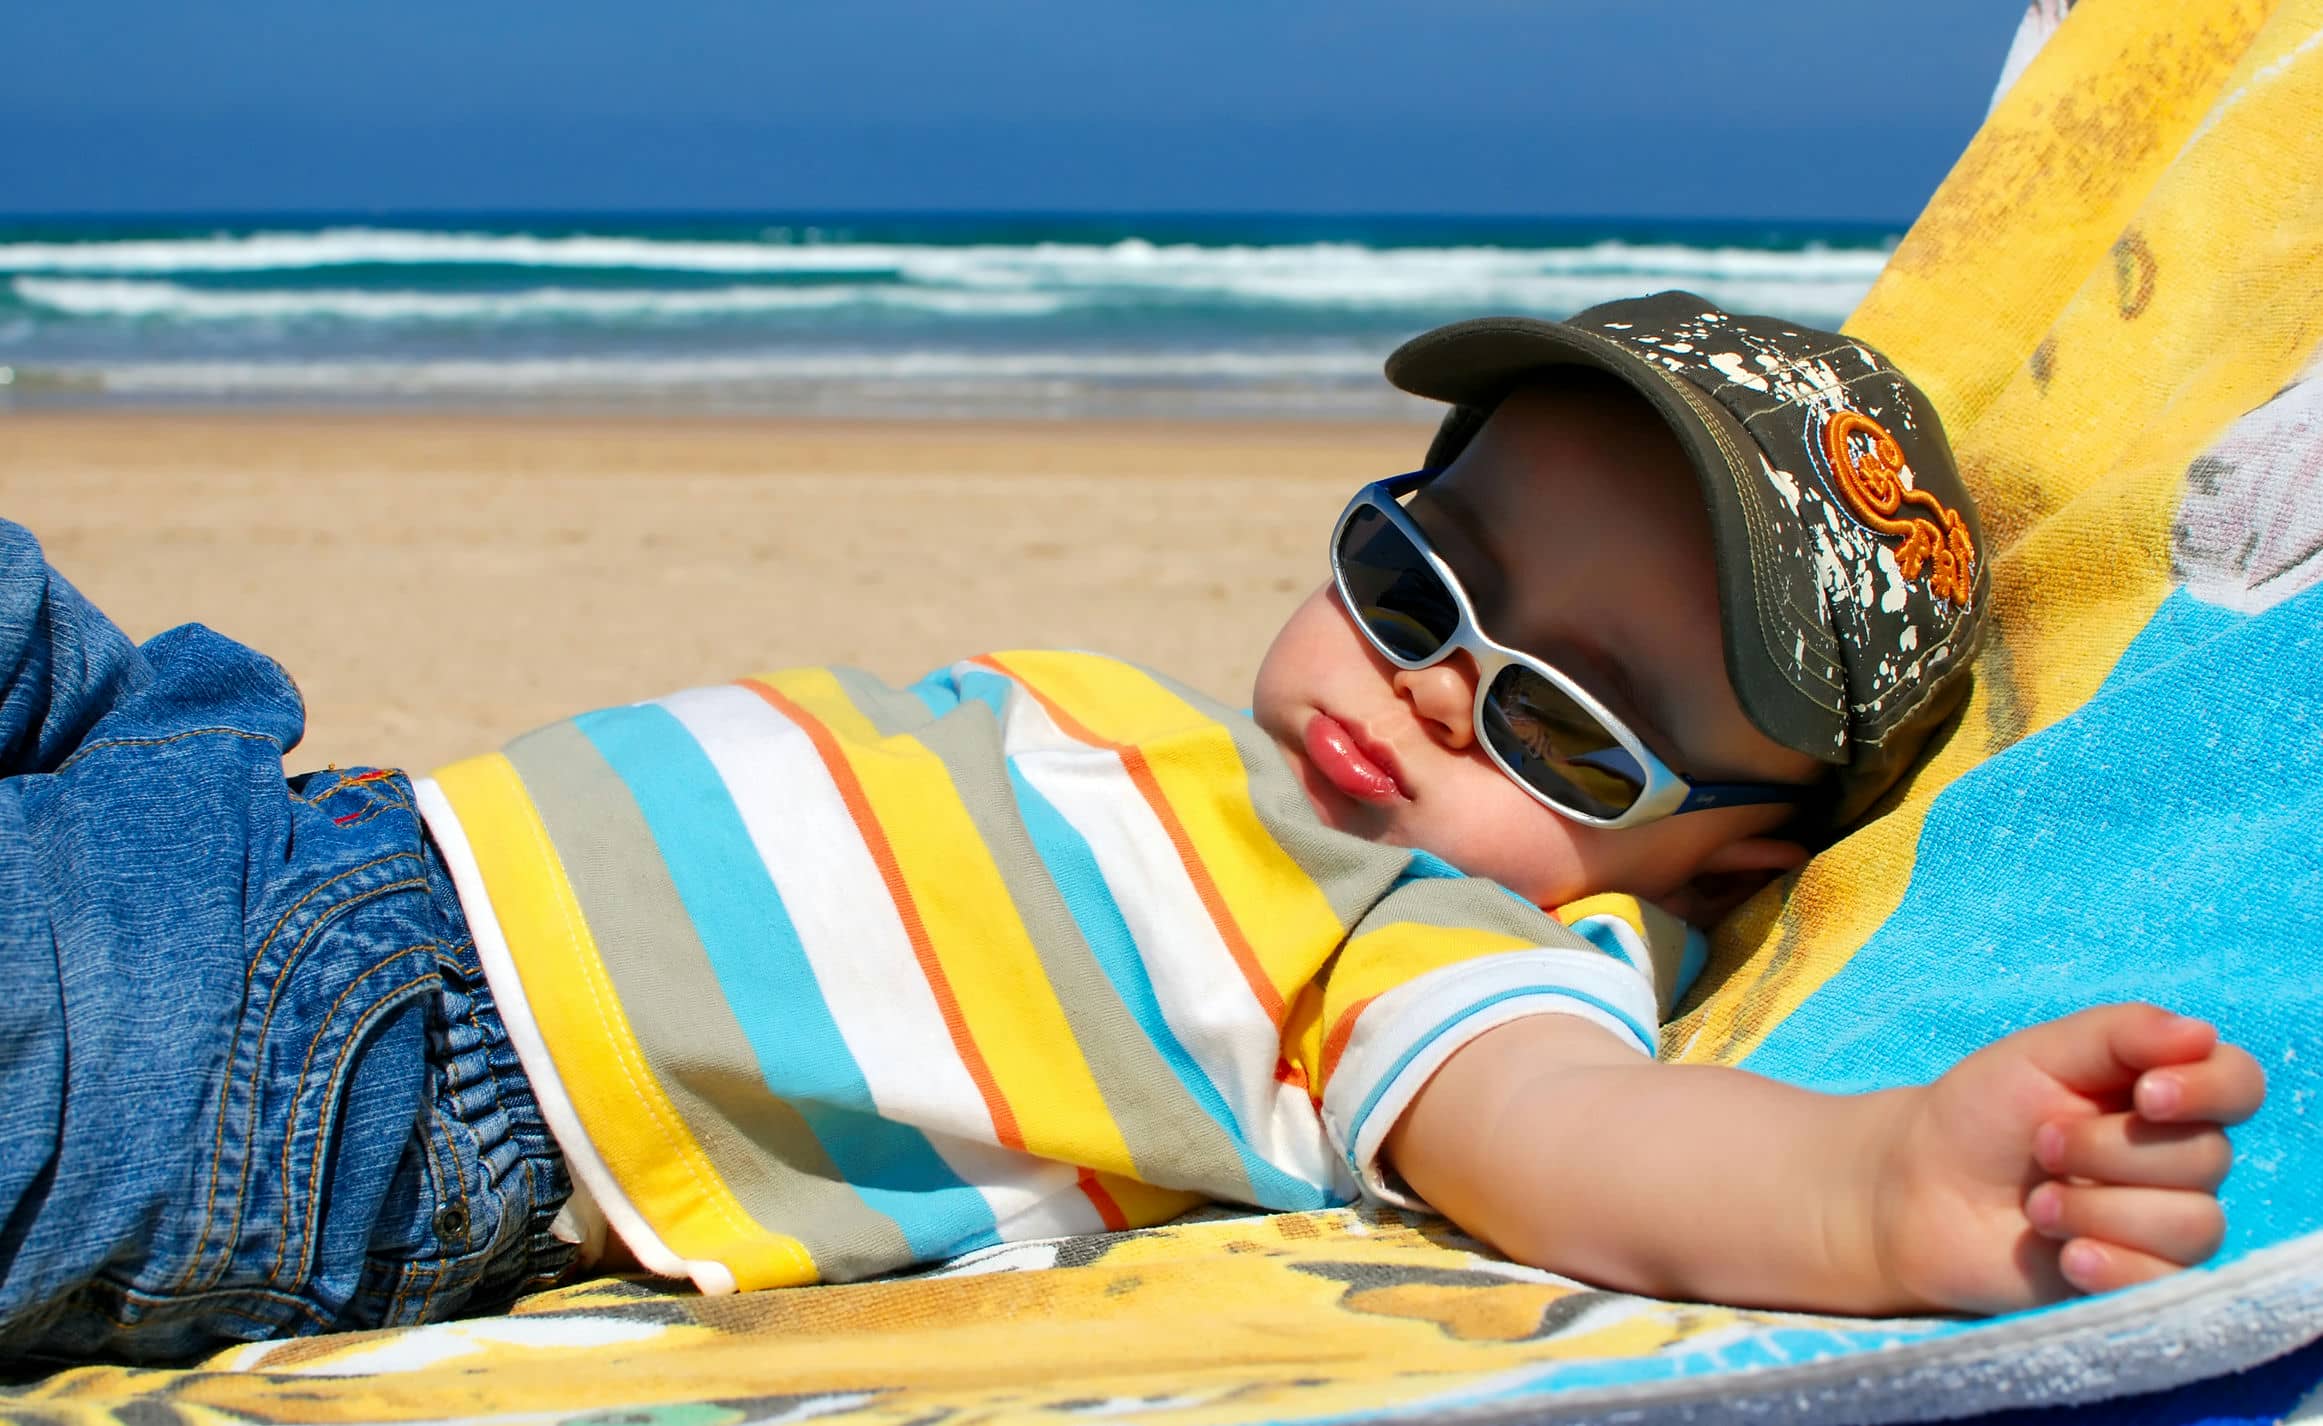 10 Tips for Helping Kids Sleep When it's Hot - ParentMap